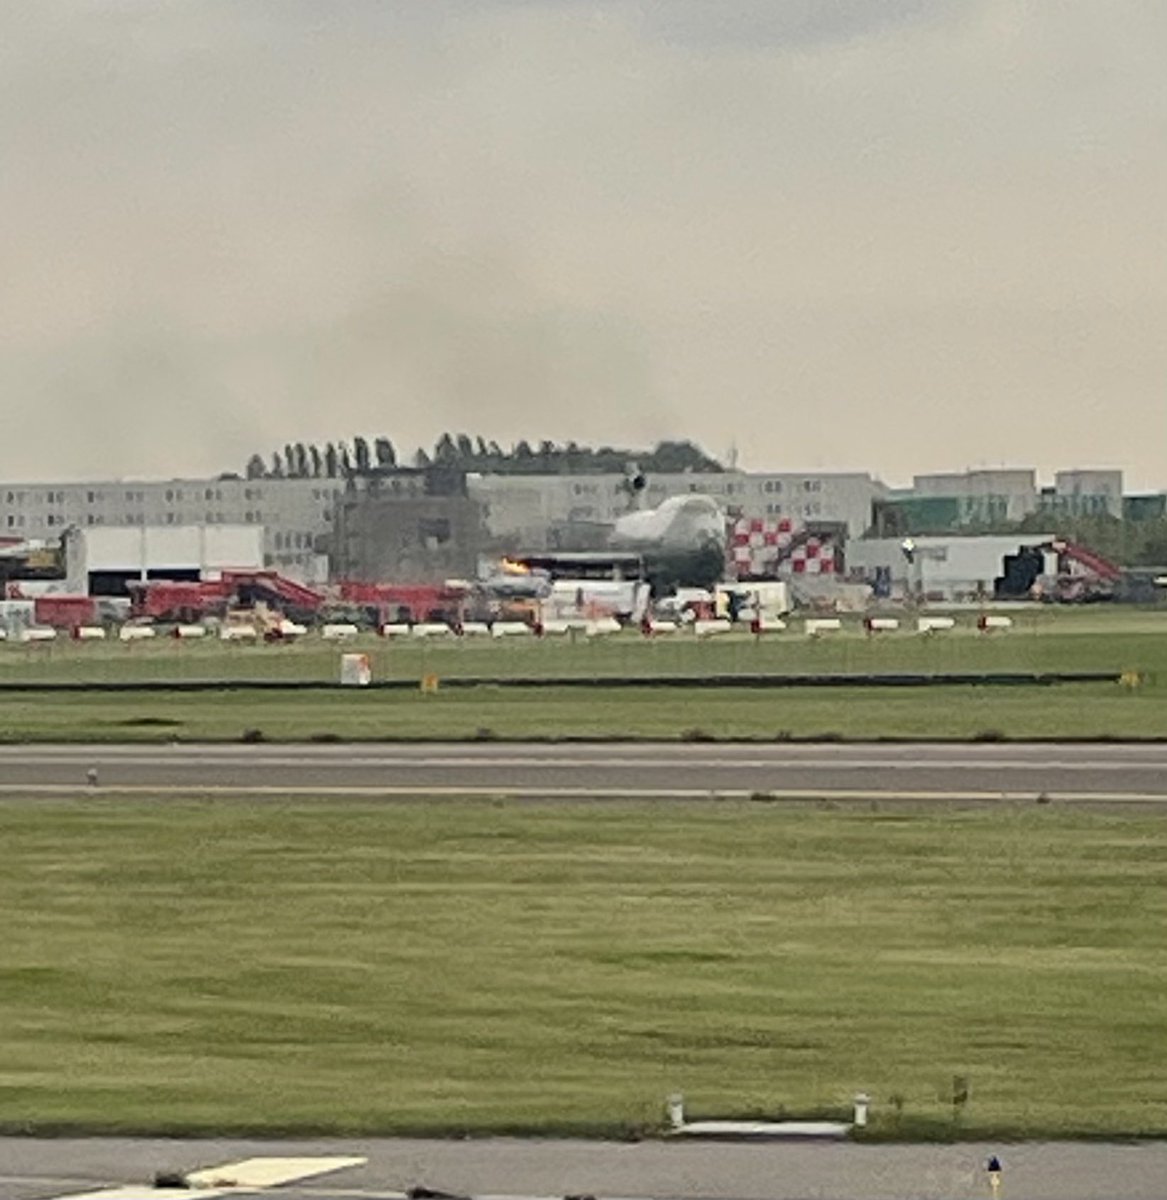 Welcome to Amsterdam. A plane on fire 🔥 😬